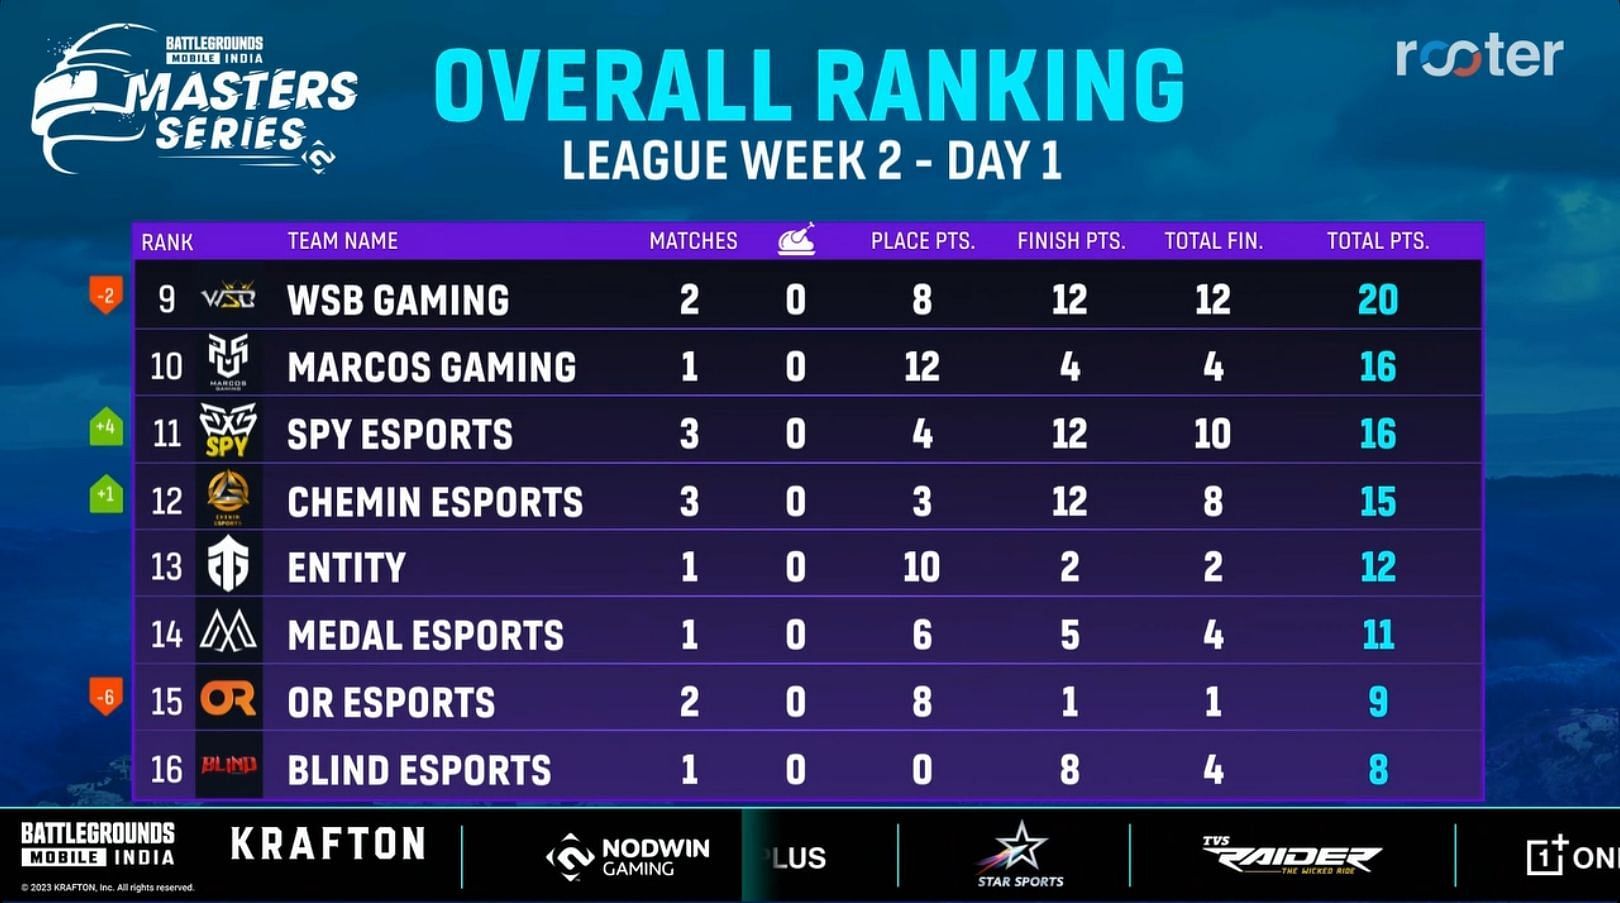 Blind Esports took 16th place after Day 1 of League Week 2 (Image via Rooter)